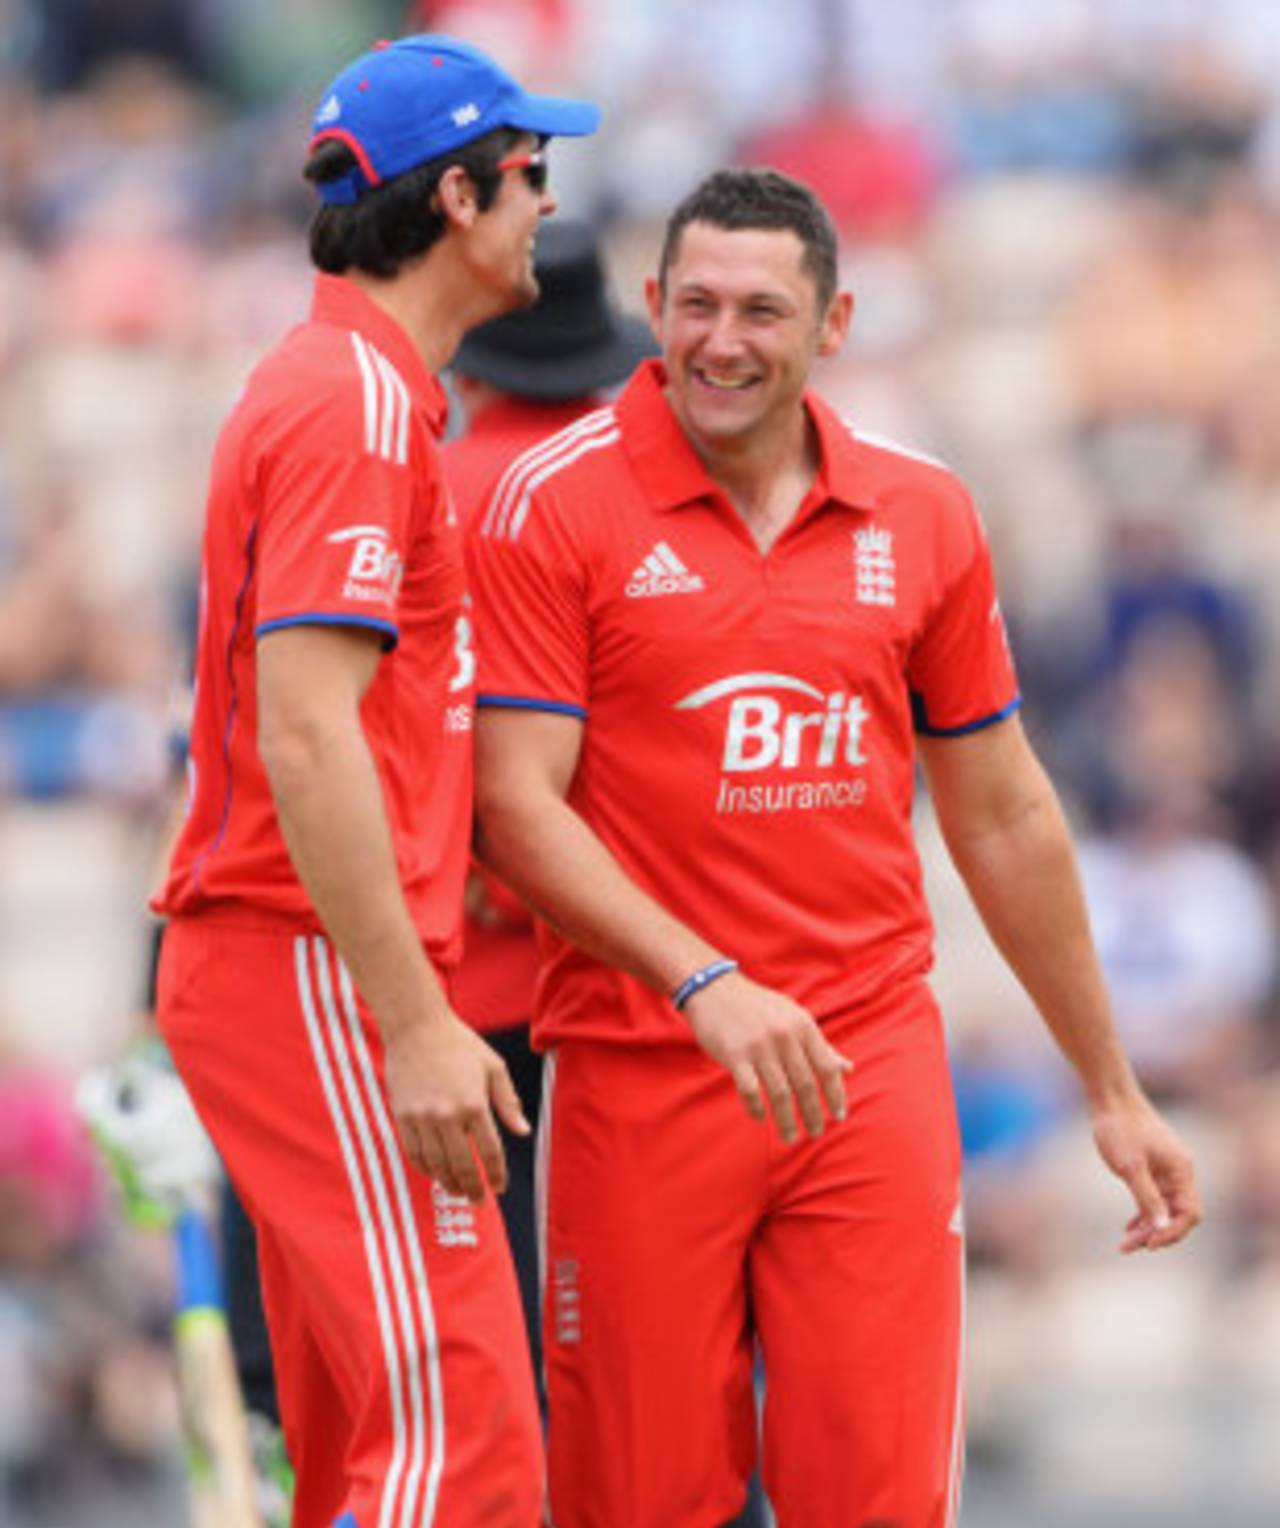 Tim Bresnan and Alastair Cook share a laugh at the former's attempted bouncer, England v New Zealand, 2nd ODI, Ageas Bowl, June 2, 2013